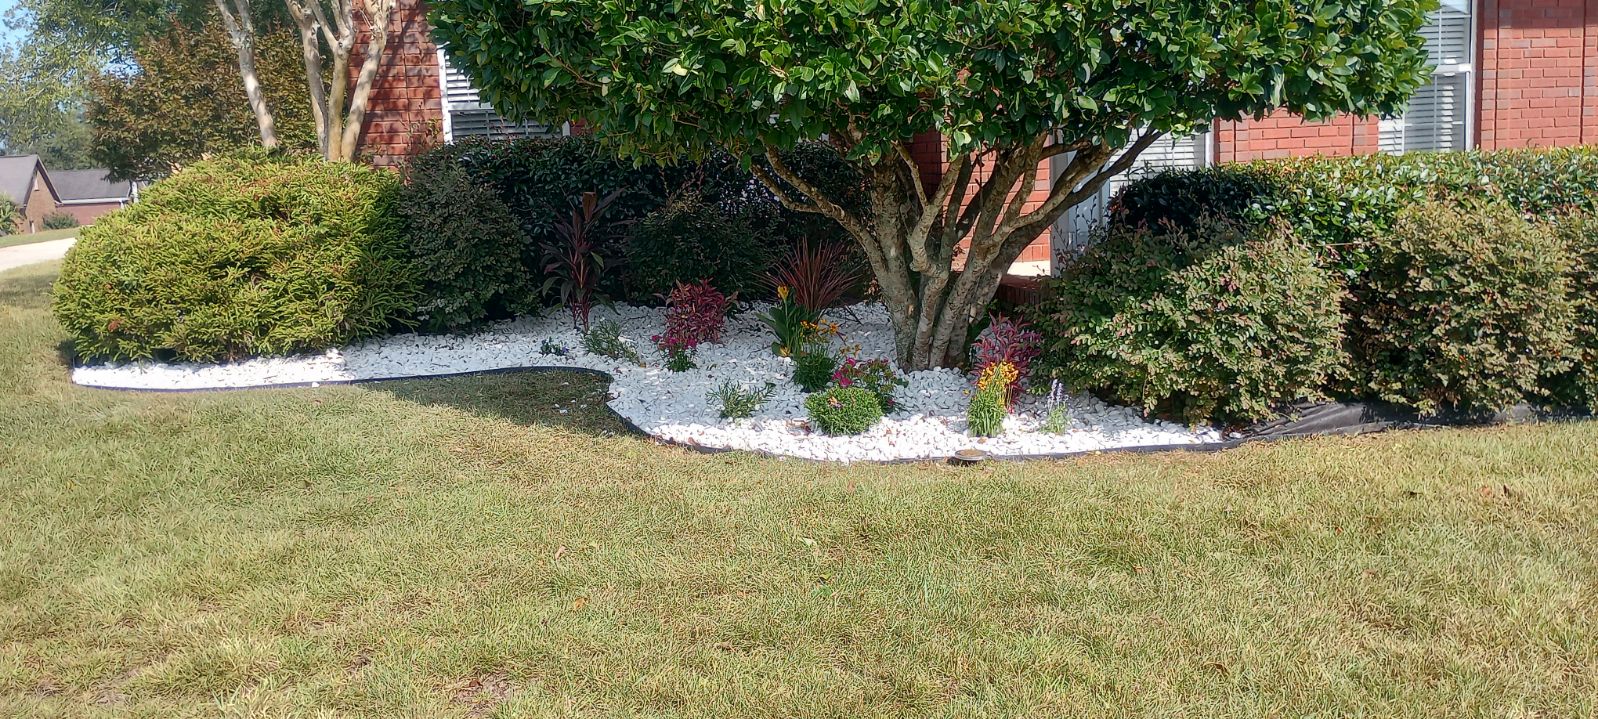 Mobile, AL Landscaping Project